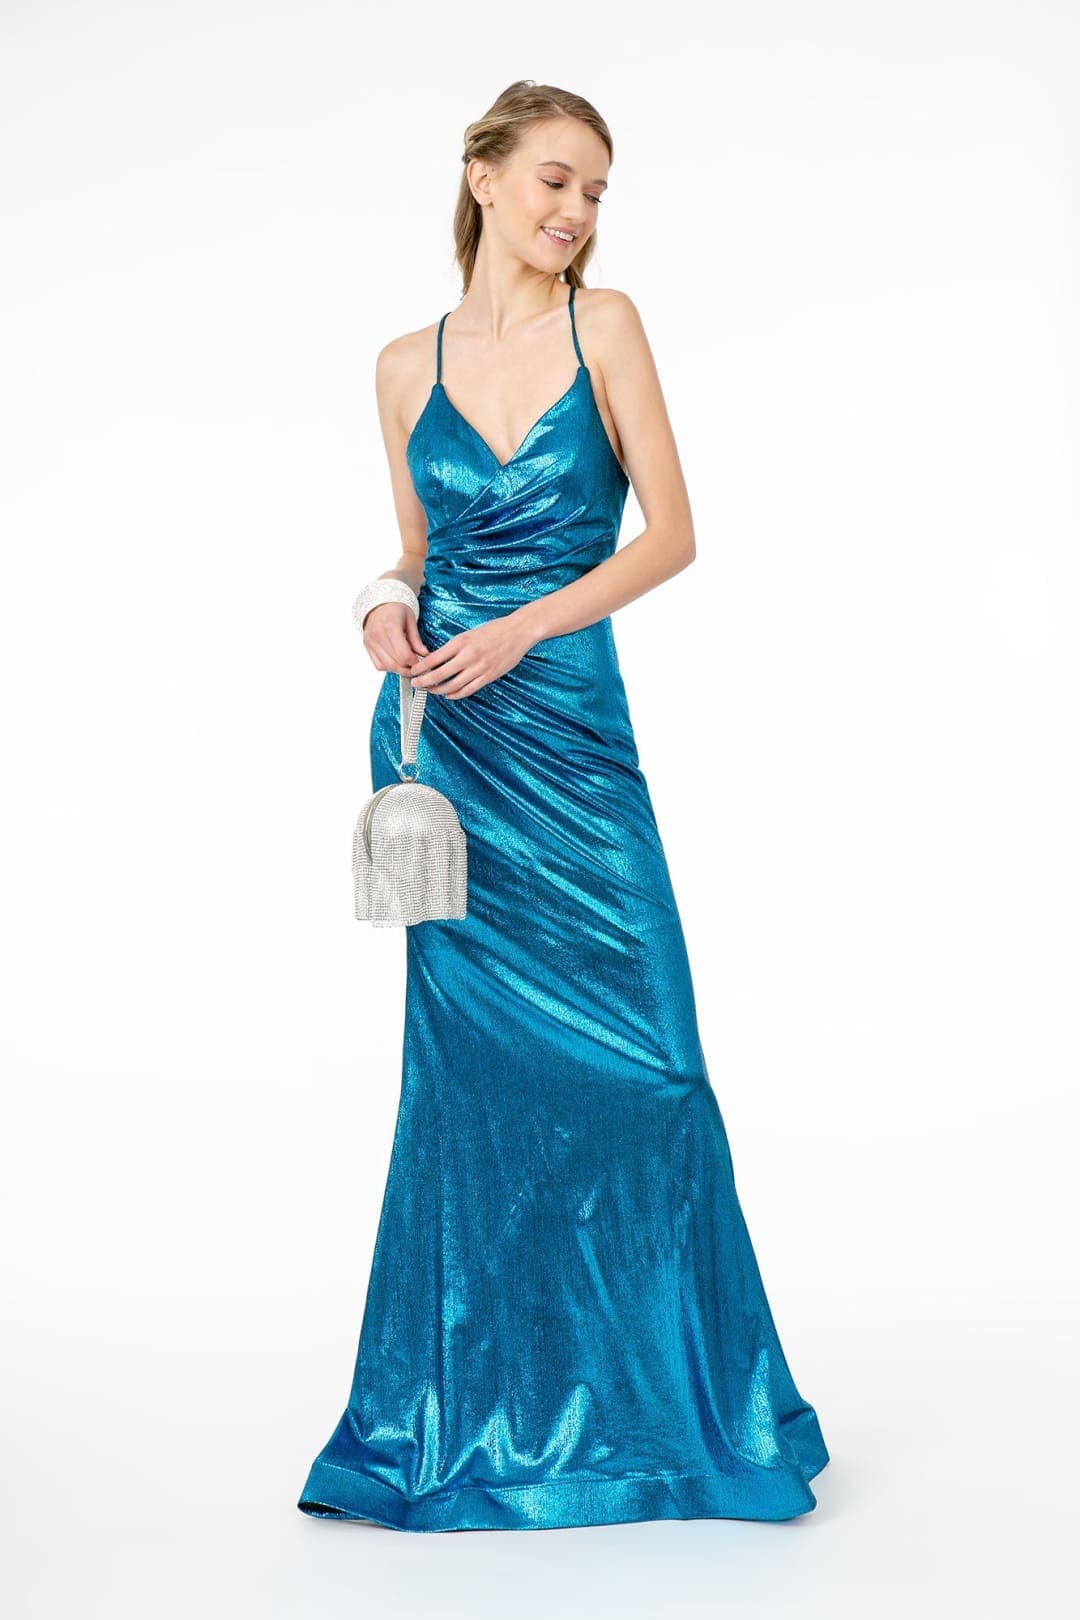 Sexy Prom Glossy Dress - TURQUOISE / XS